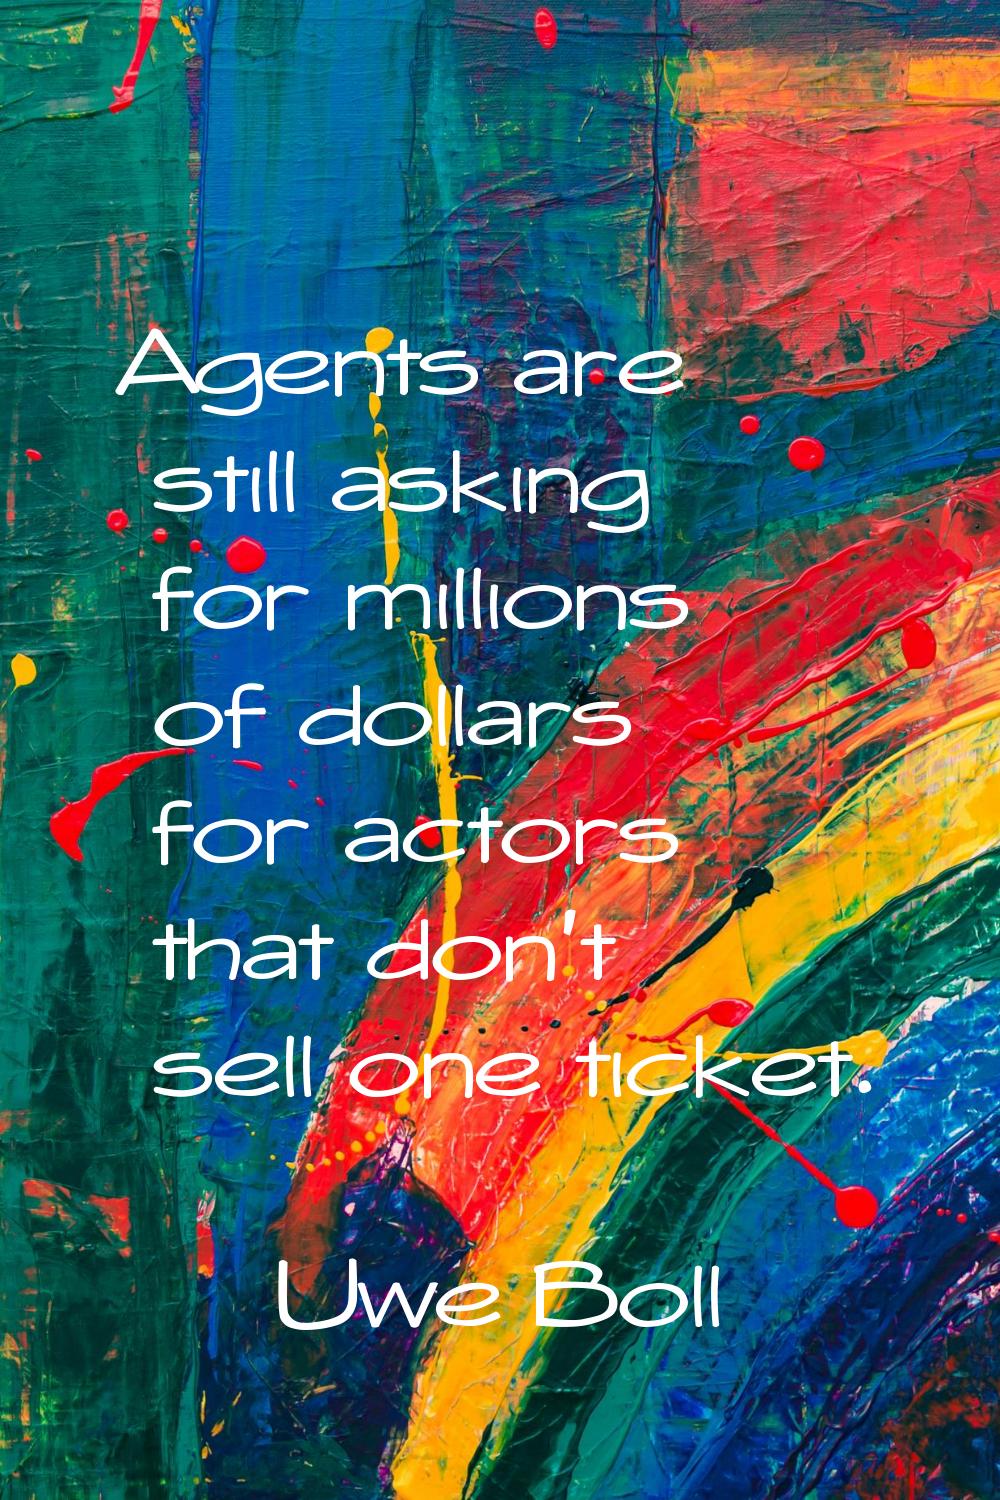 Agents are still asking for millions of dollars for actors that don't sell one ticket.